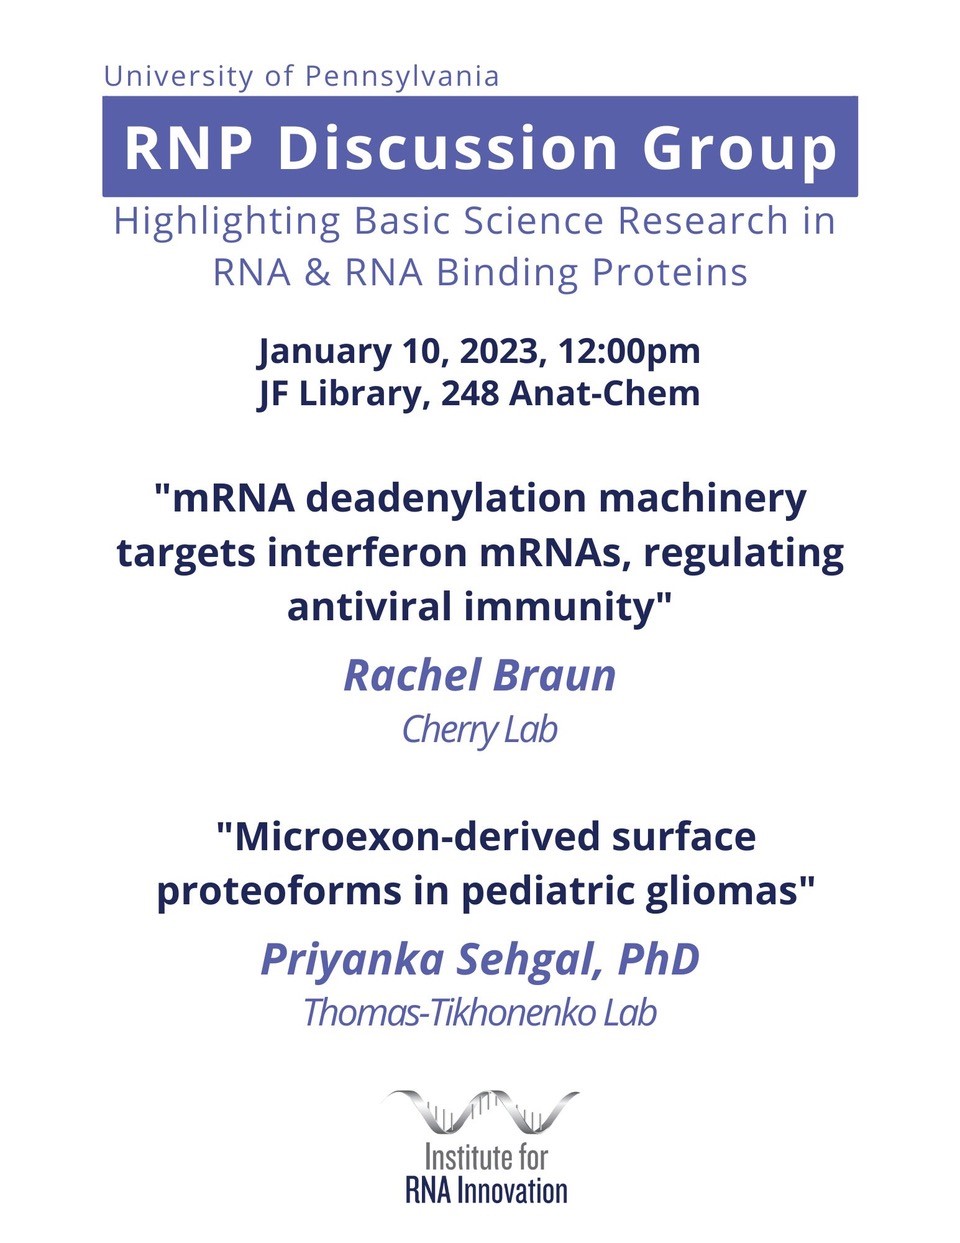 flyer for RNP Discussion Group event on 01.10.2023 at 12pm in JF Library